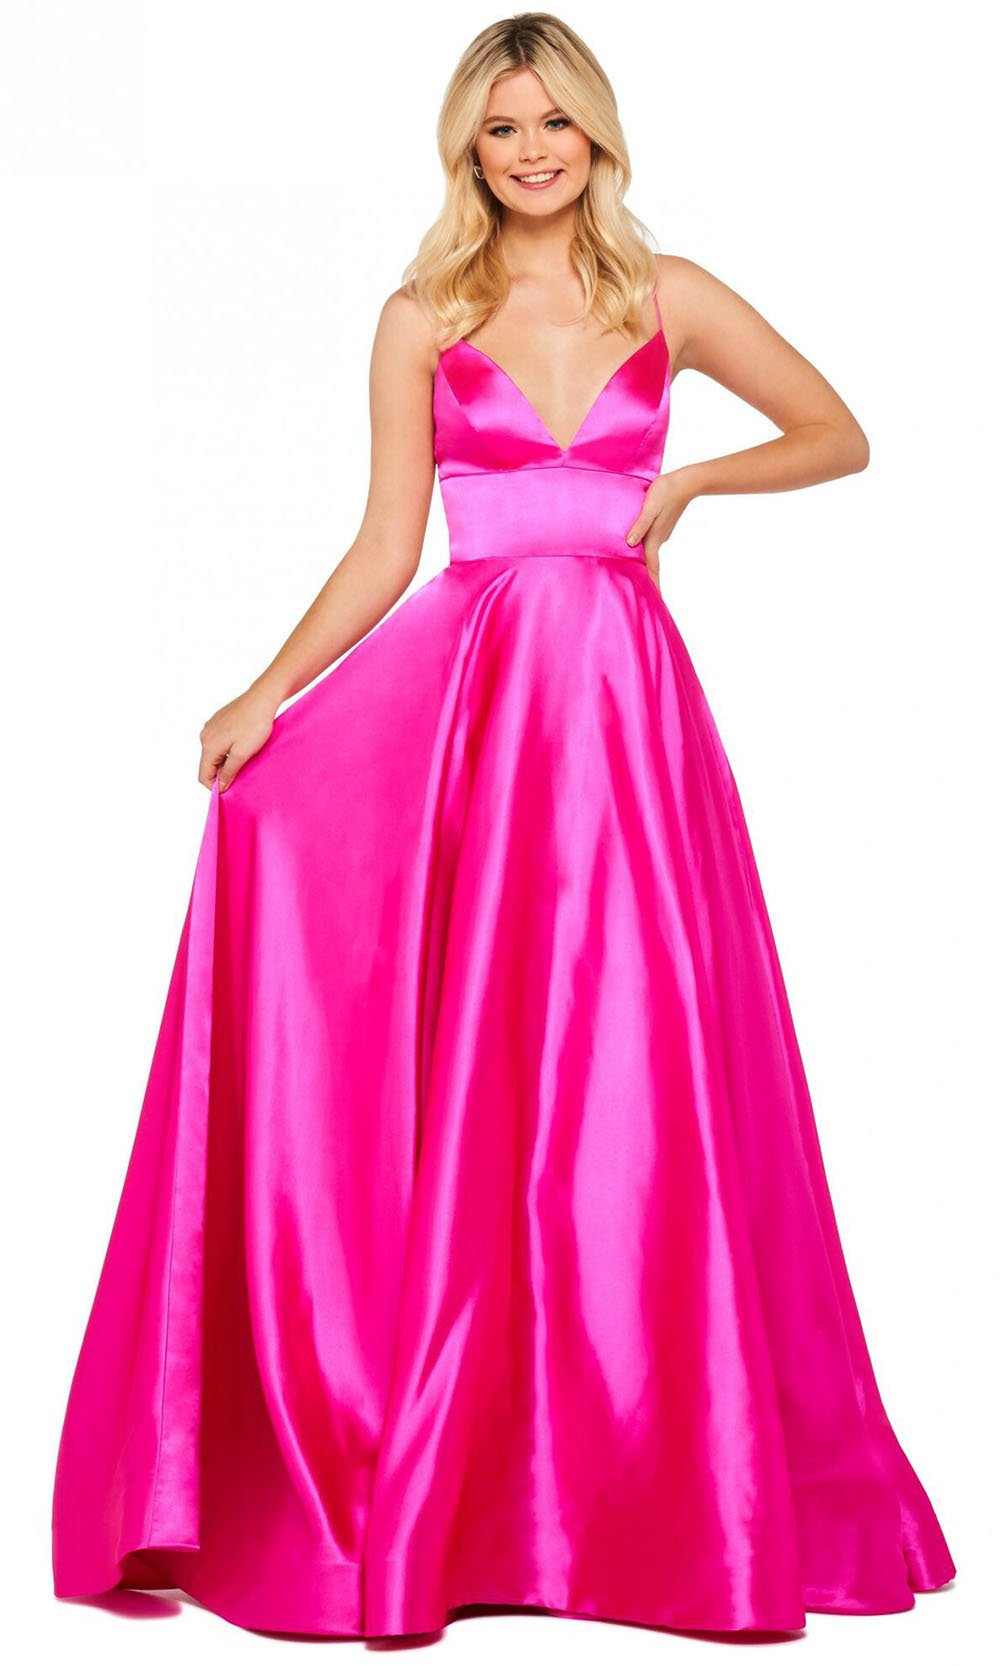 Sherri Hill - Lace Up Back Satin A-Line Dress 53885 In Pink